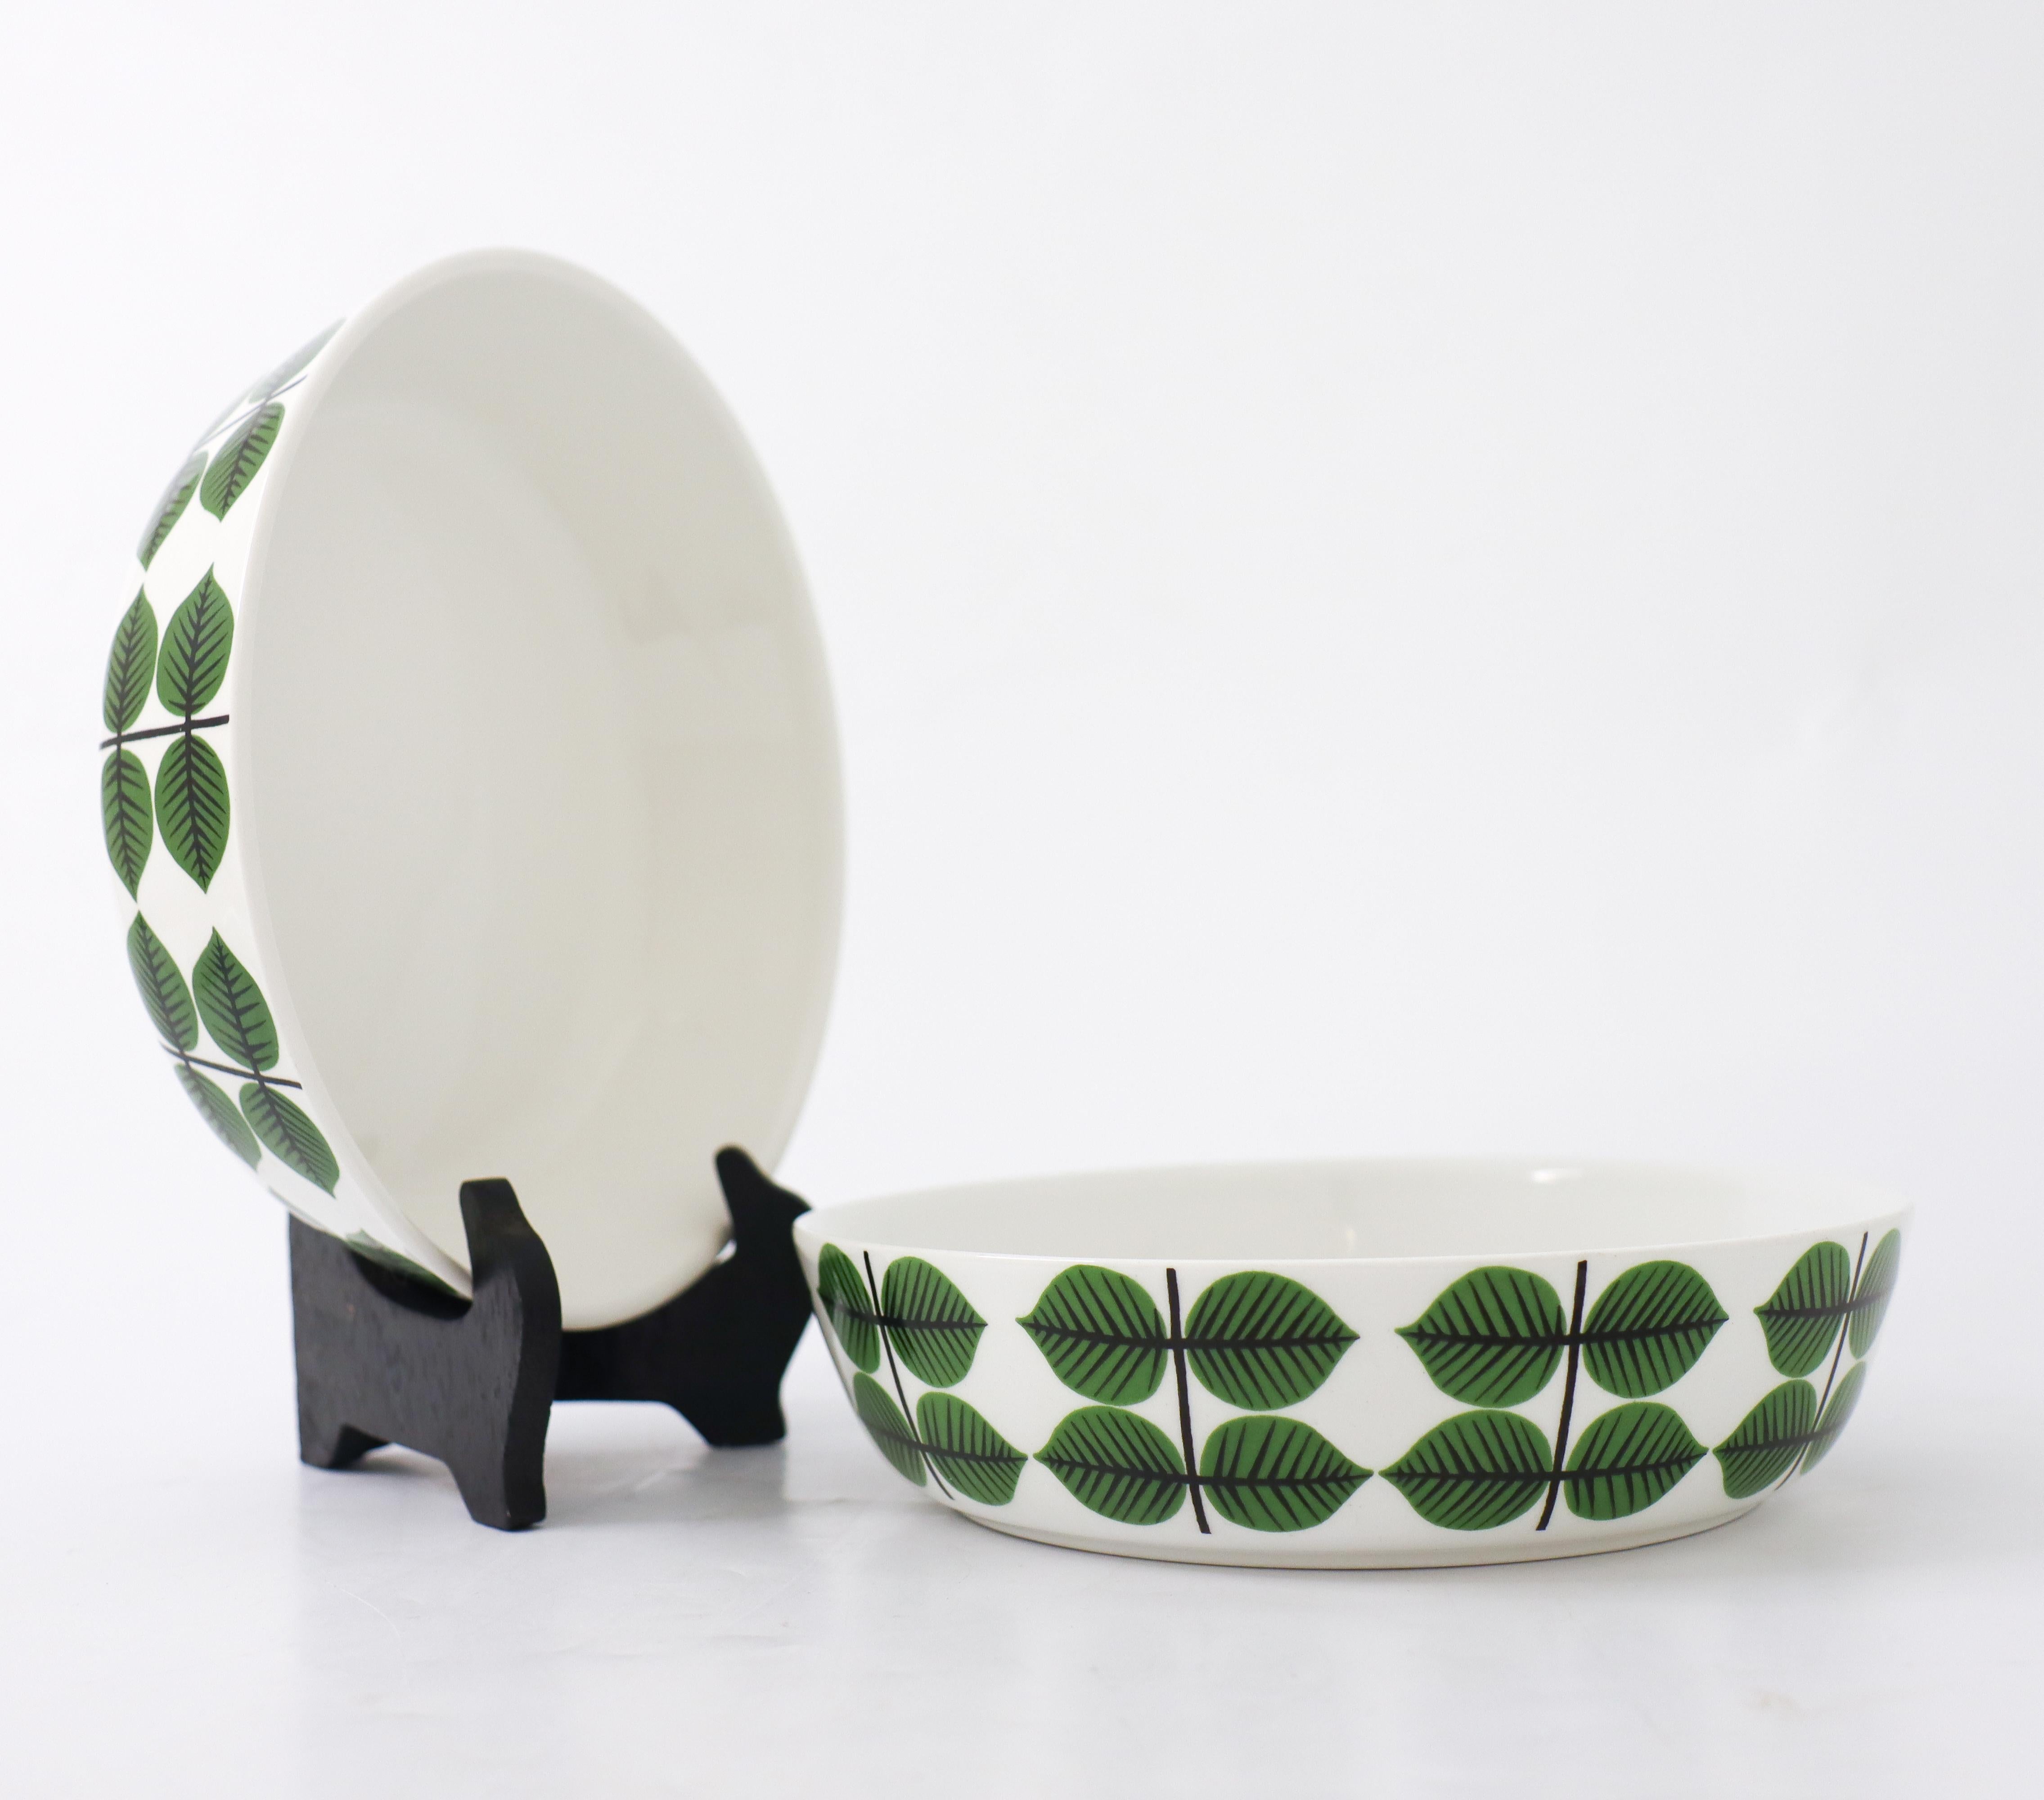 A pair of breakfast bowls in the very famous pattern Berså designed by Stig Lindberg at Gustavsberg. They are made in porcelain and are 17,3 cm in diameter. They are in very good condition except from some minor scratches and some minor mark.